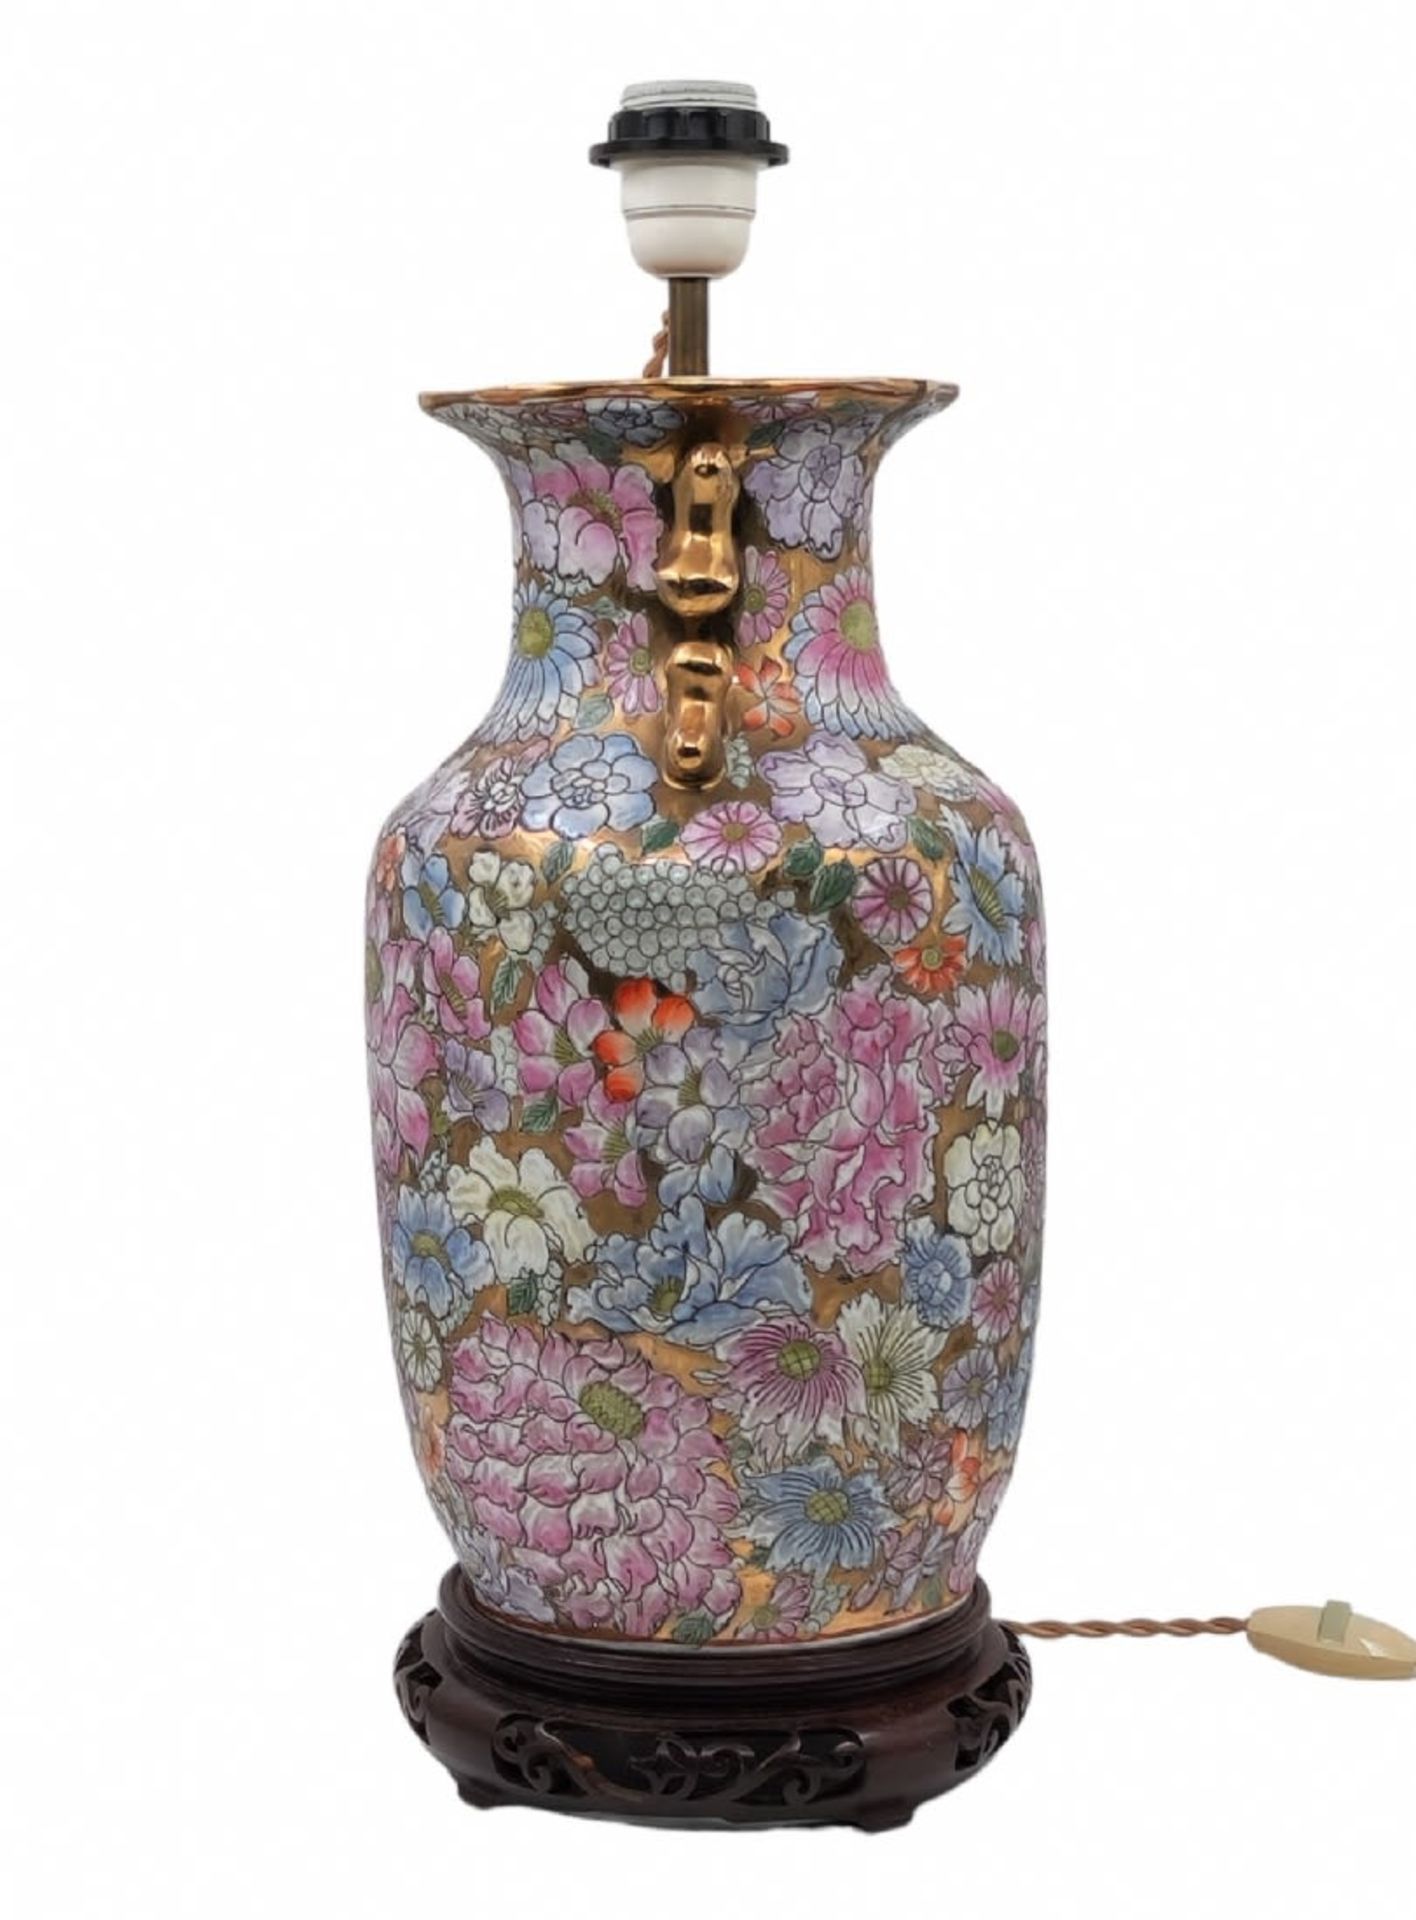 Chinese base (leg) for a table lamp, made of porcelain jug, pink family, decorated with hand-painted